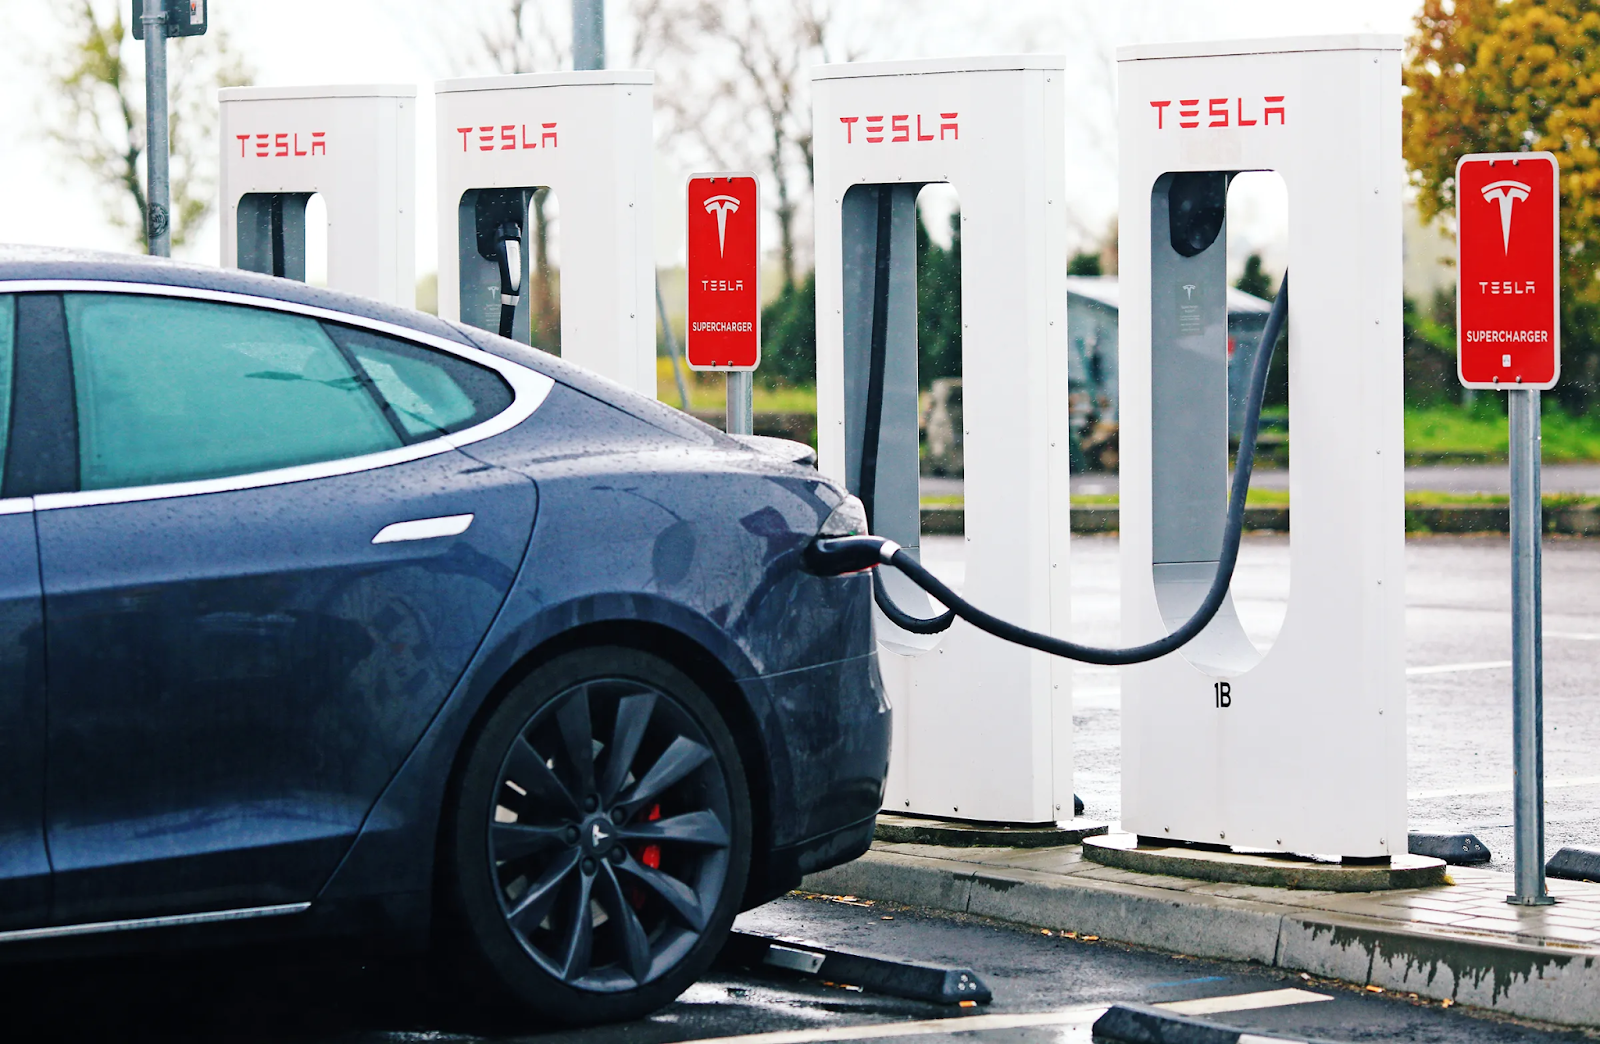 How Many Solar Panels Required To Charge A Tesla?